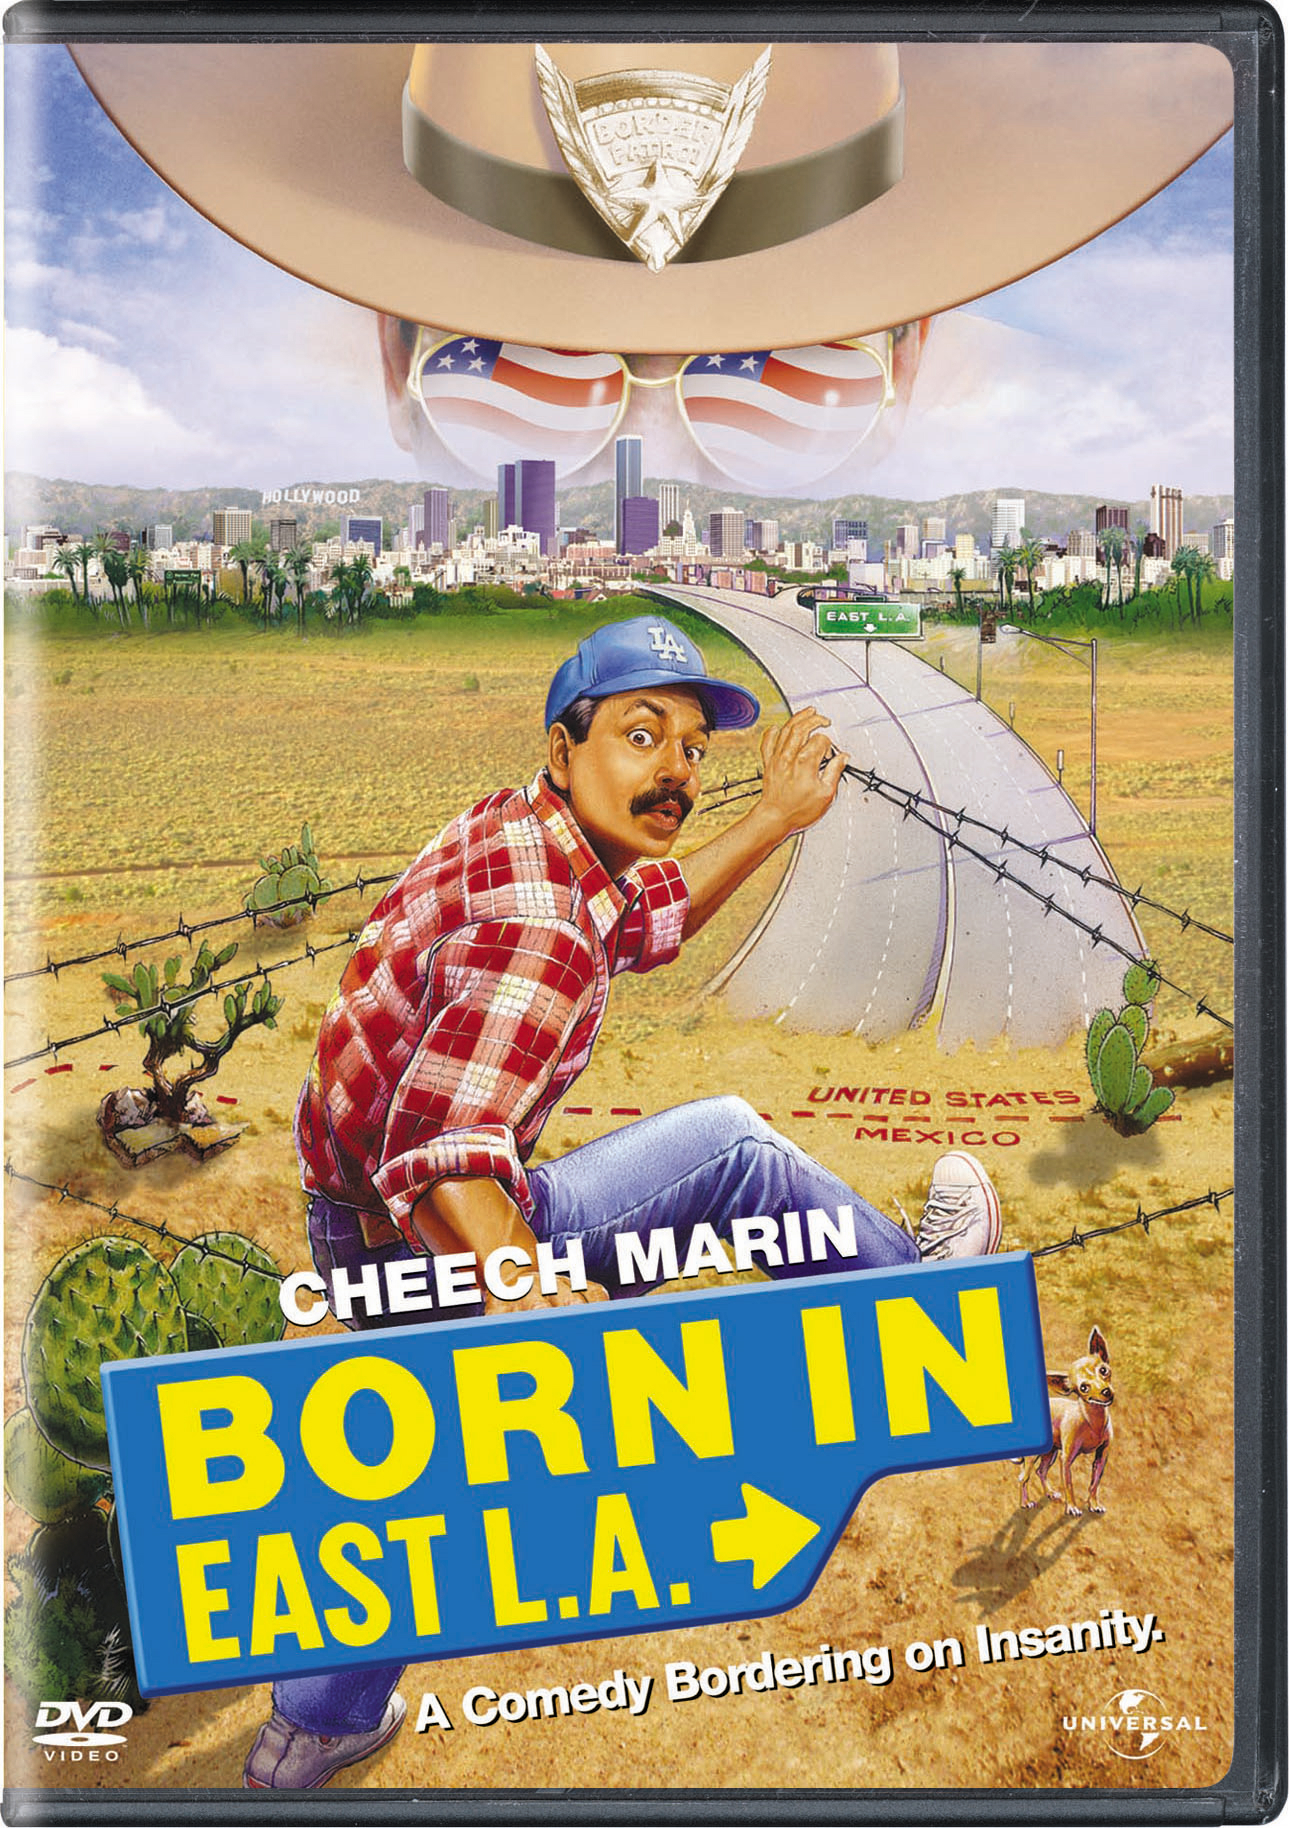 Born In East LA - DVD [ 1987 ]  - Comedy Movies On DVD - Movies On GRUV